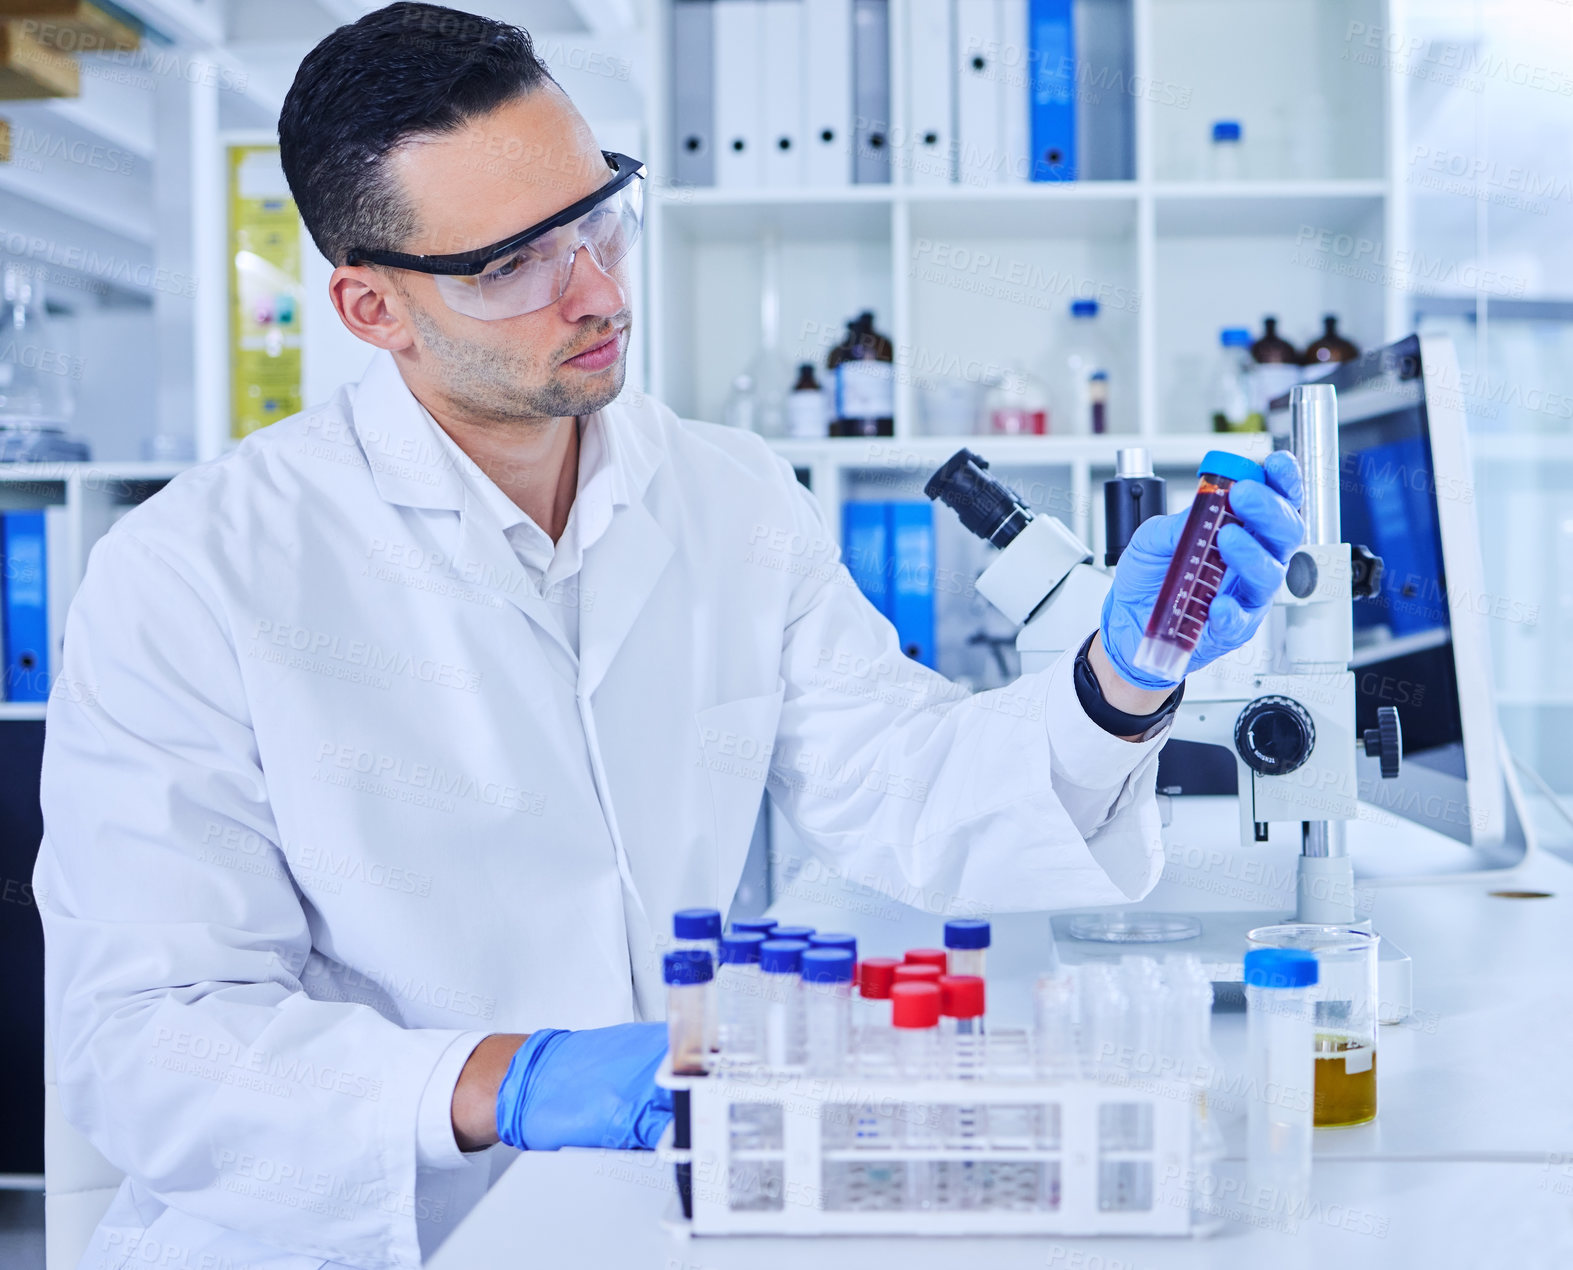 Buy stock photo Cropped shot of a handsome young male scientist working with medical samples in his lab